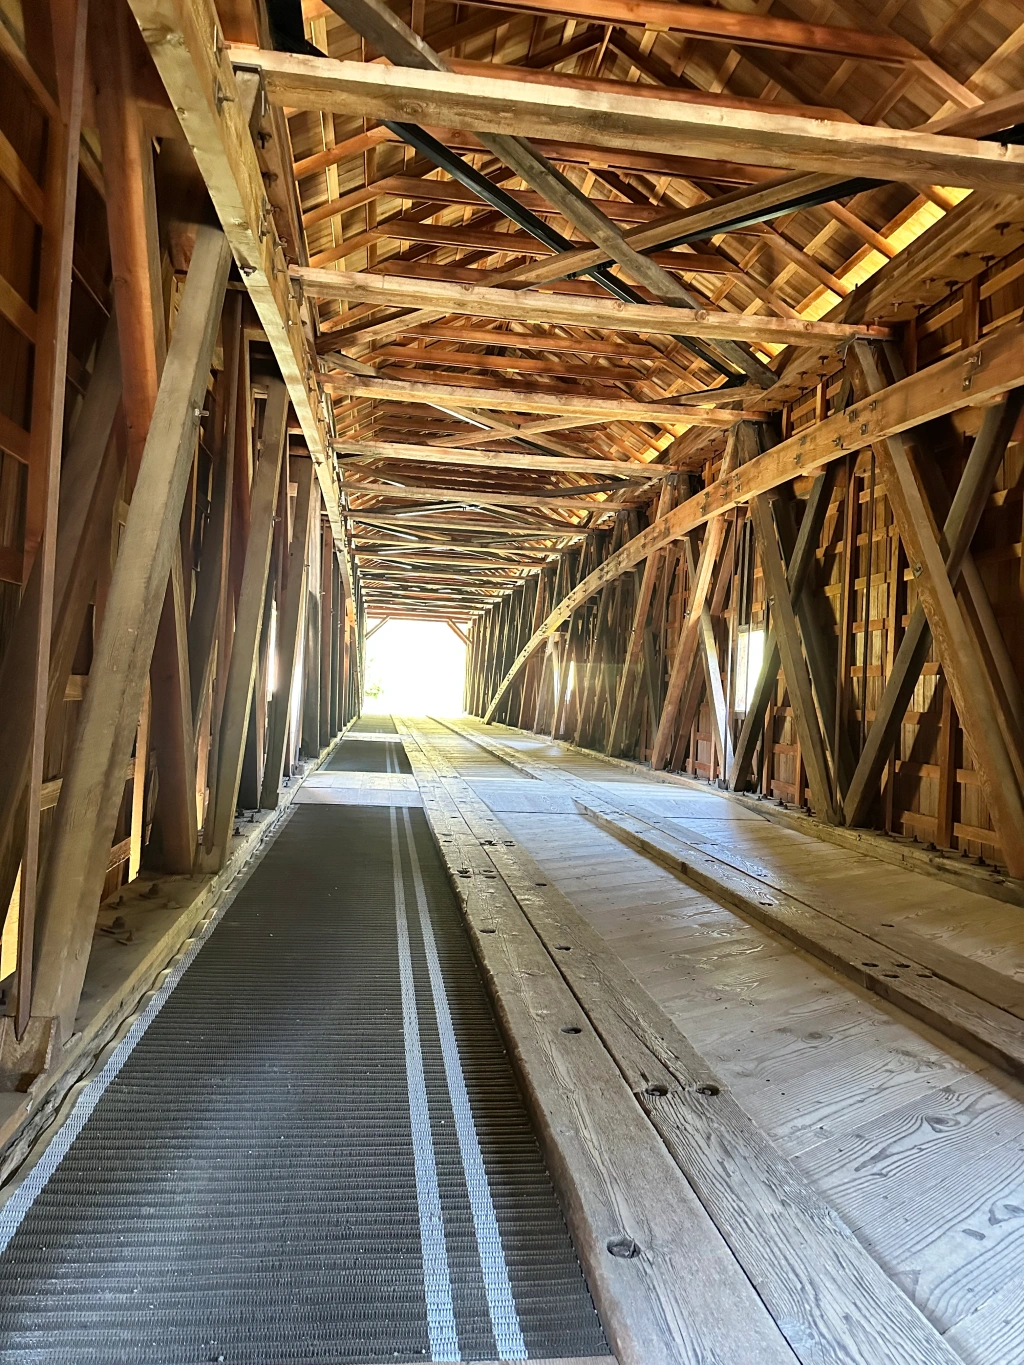 South Yuba River State Park and the Bridgeport Covered Bridge